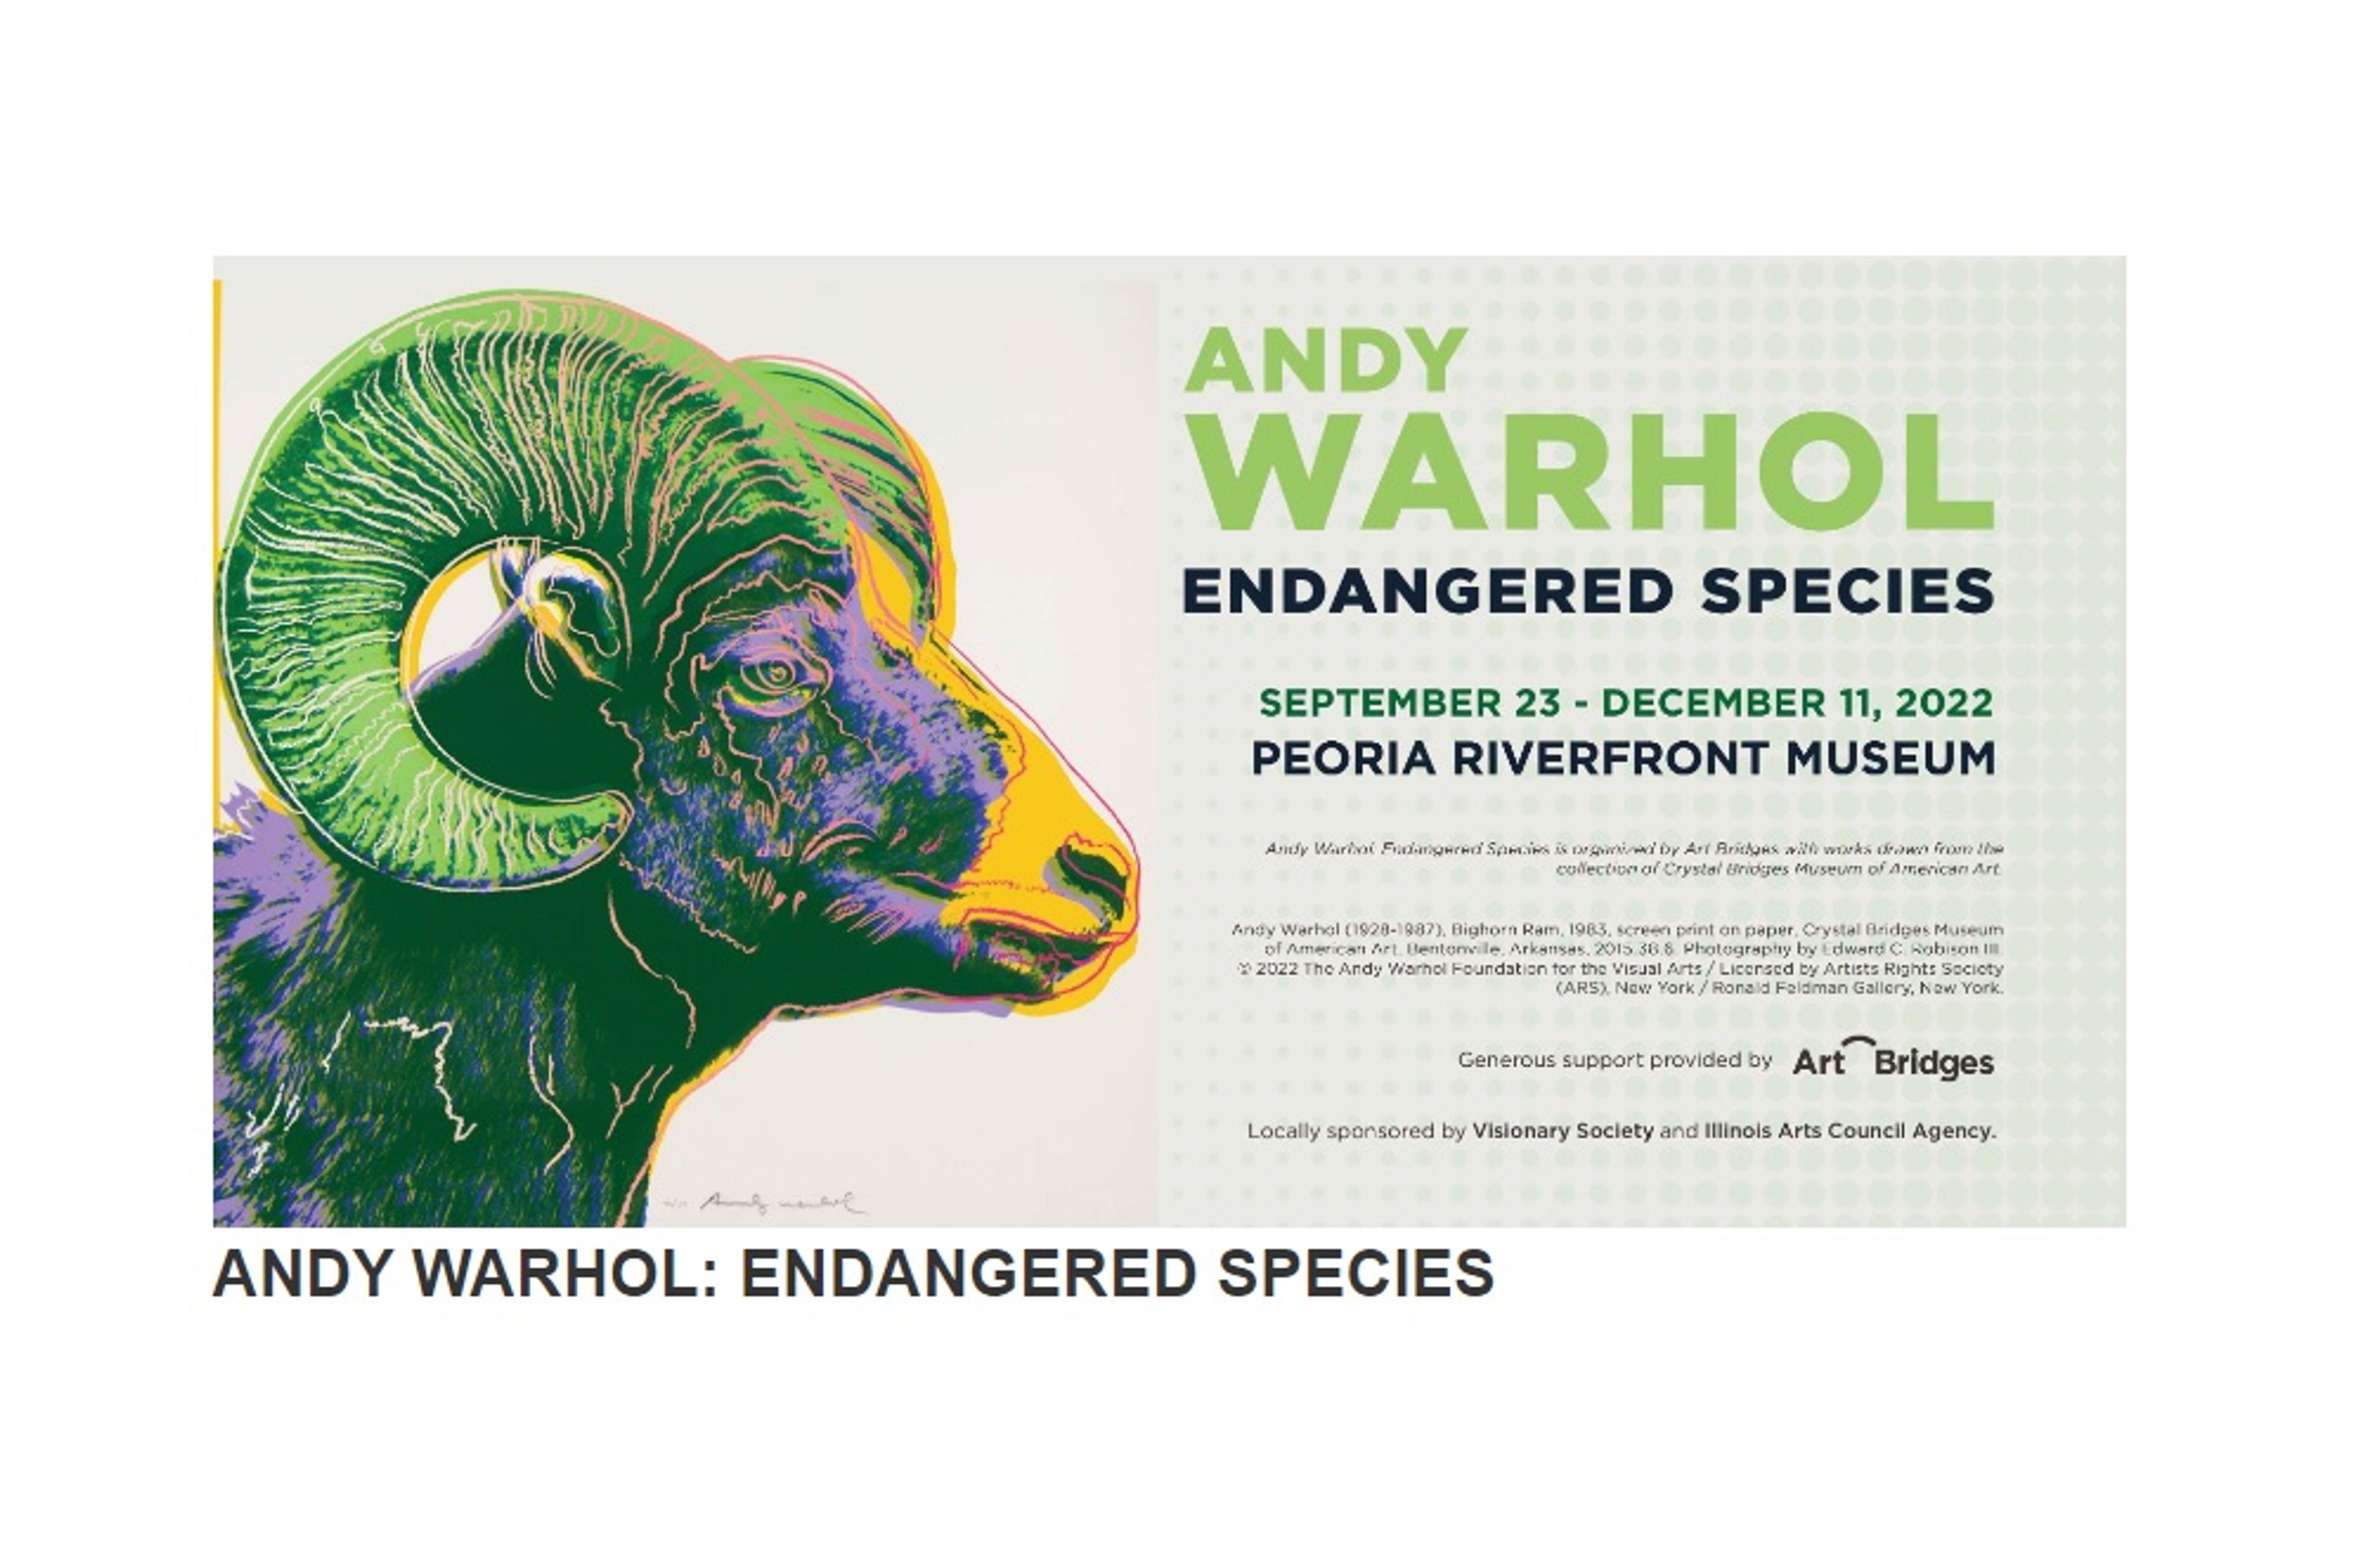 Andy Warhol Endangered Species ad Peoria Riverfront Museum